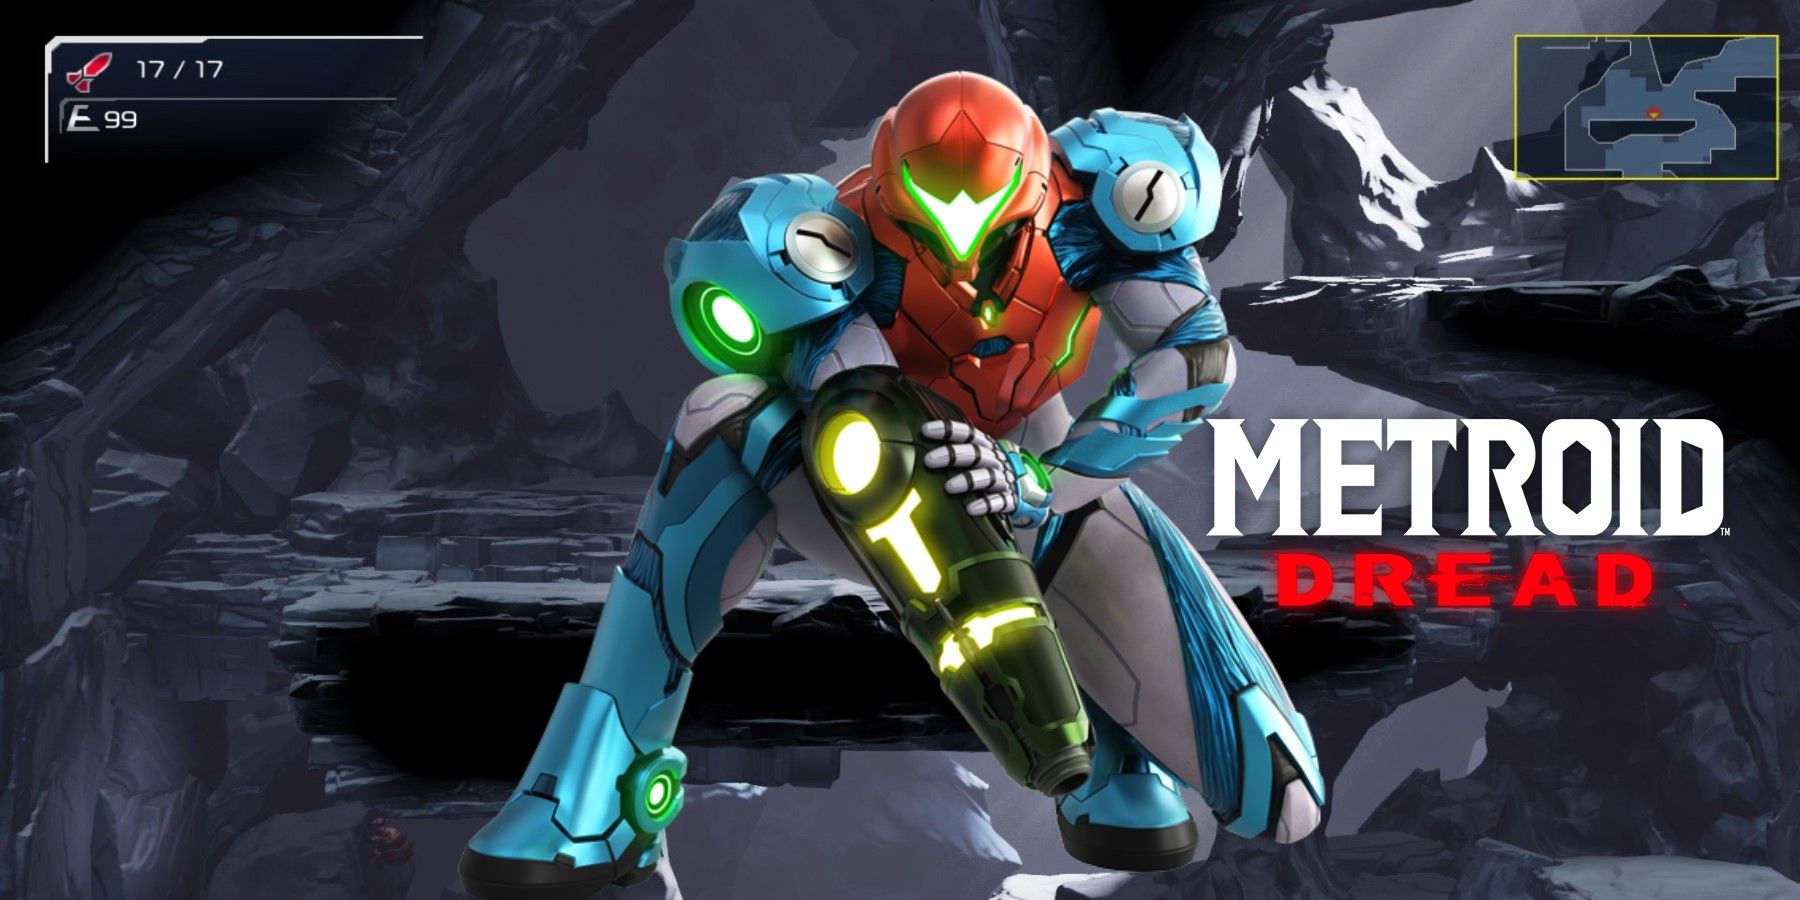 Hidden Secrets of Metroid Dread Revealed in New 'Out of Bounds' Video